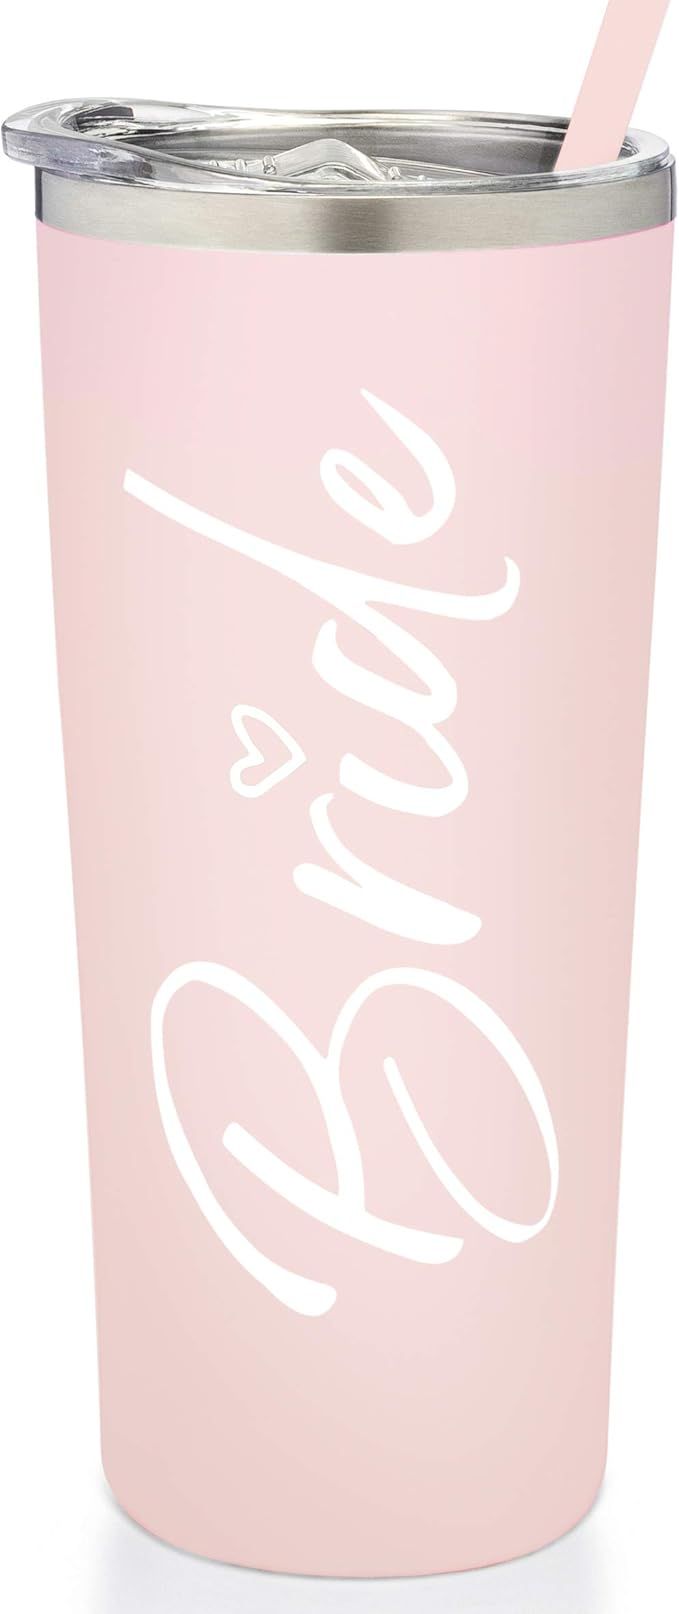 SassyCups Bride Tumbler Cup | Vacuum Insulated Stainless Steel Drink Cup with Straw for Bride to ... | Amazon (US)